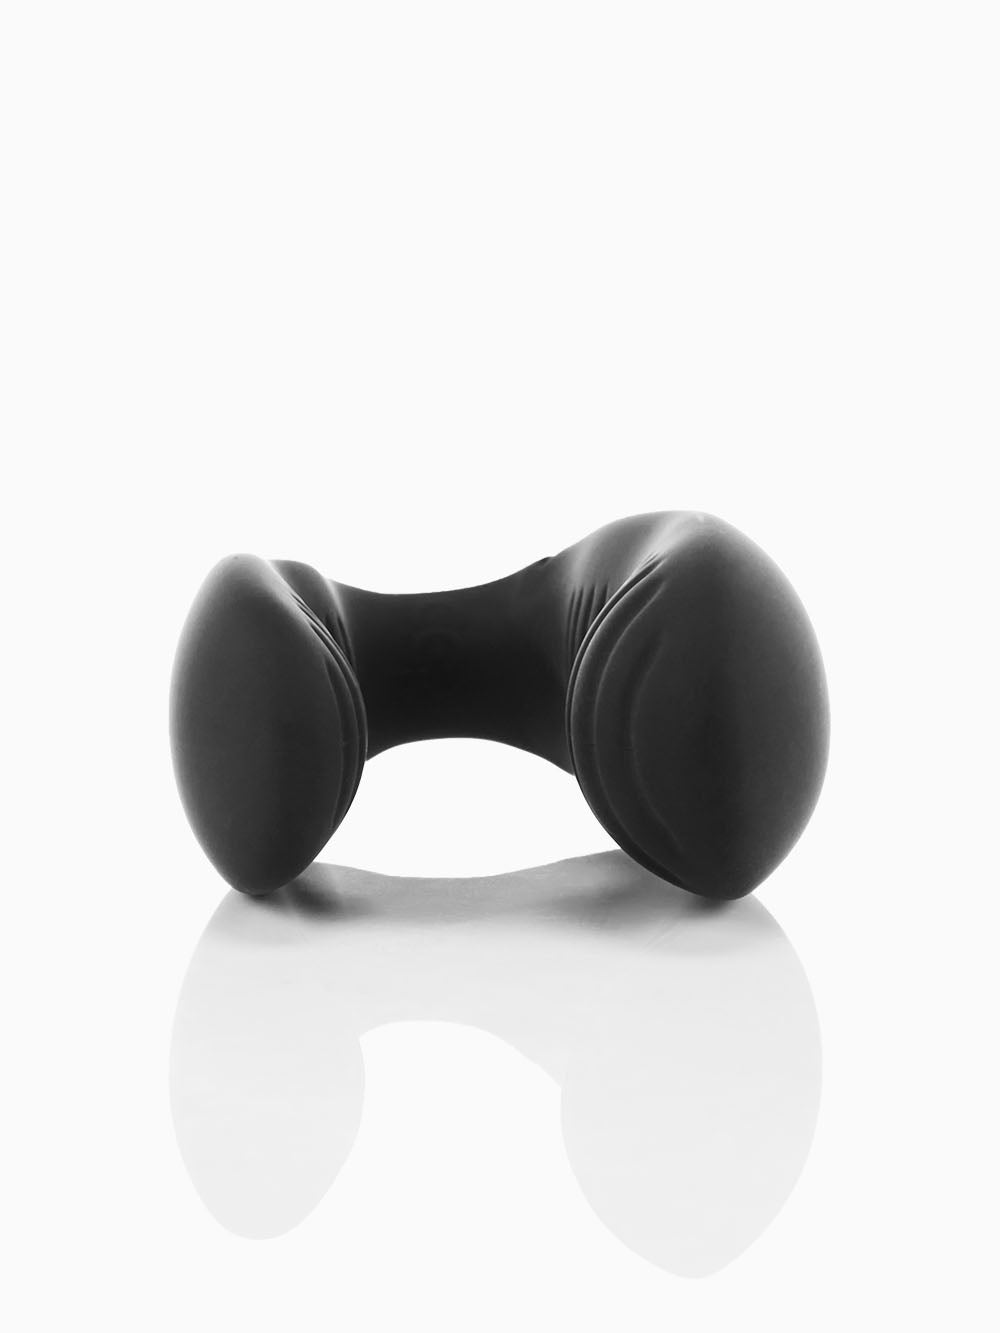 Pillow Talk Dual Mouth And Clitoral Vibrator Black, 3 Inches